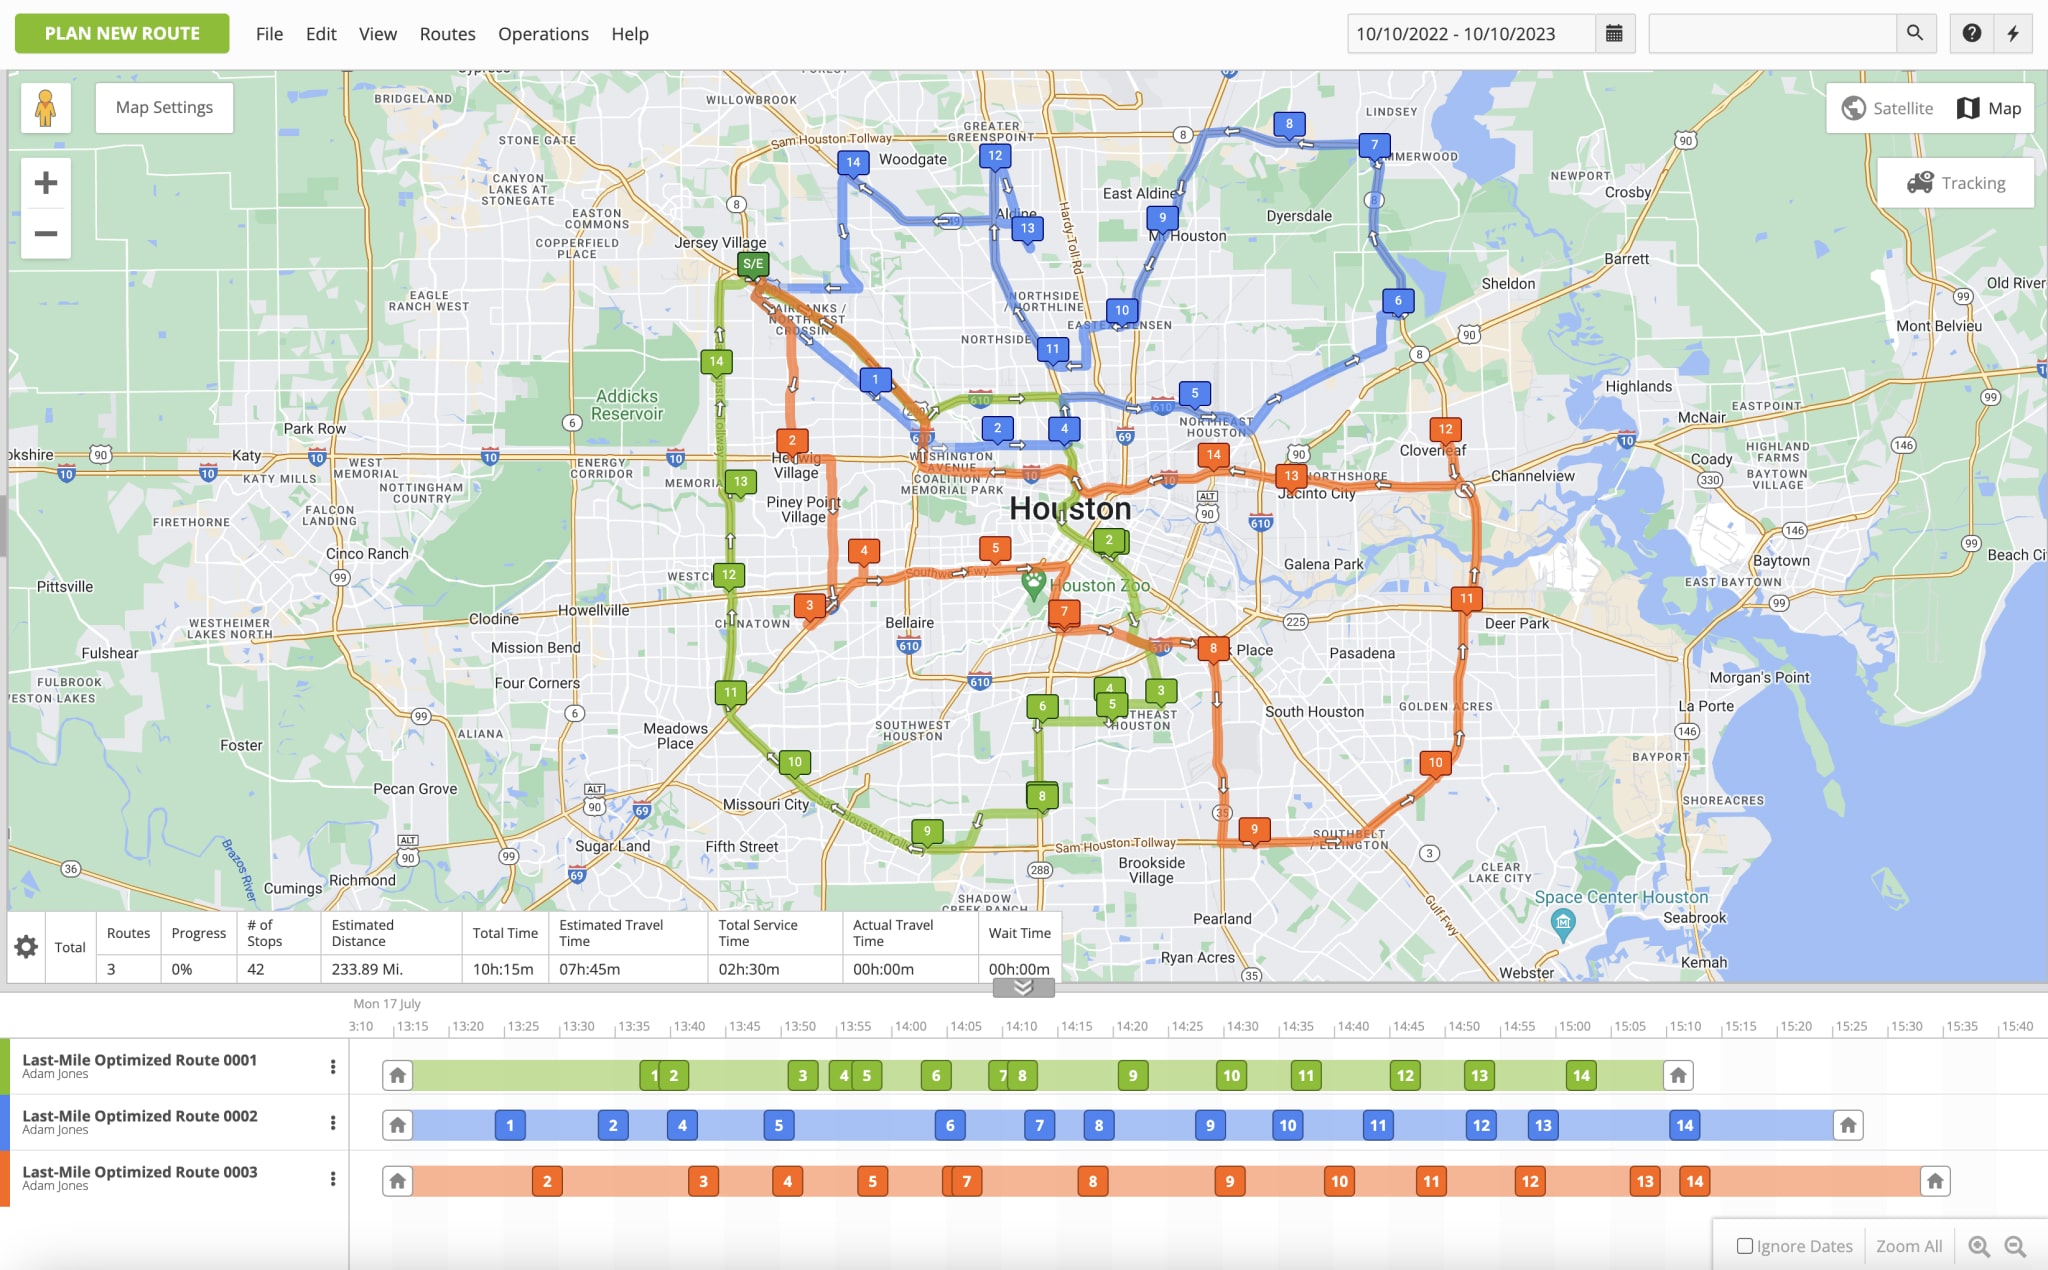 Manage planned and optimized last mile routes in Route4Me's Route Editor, Routes Map, and Routes List.